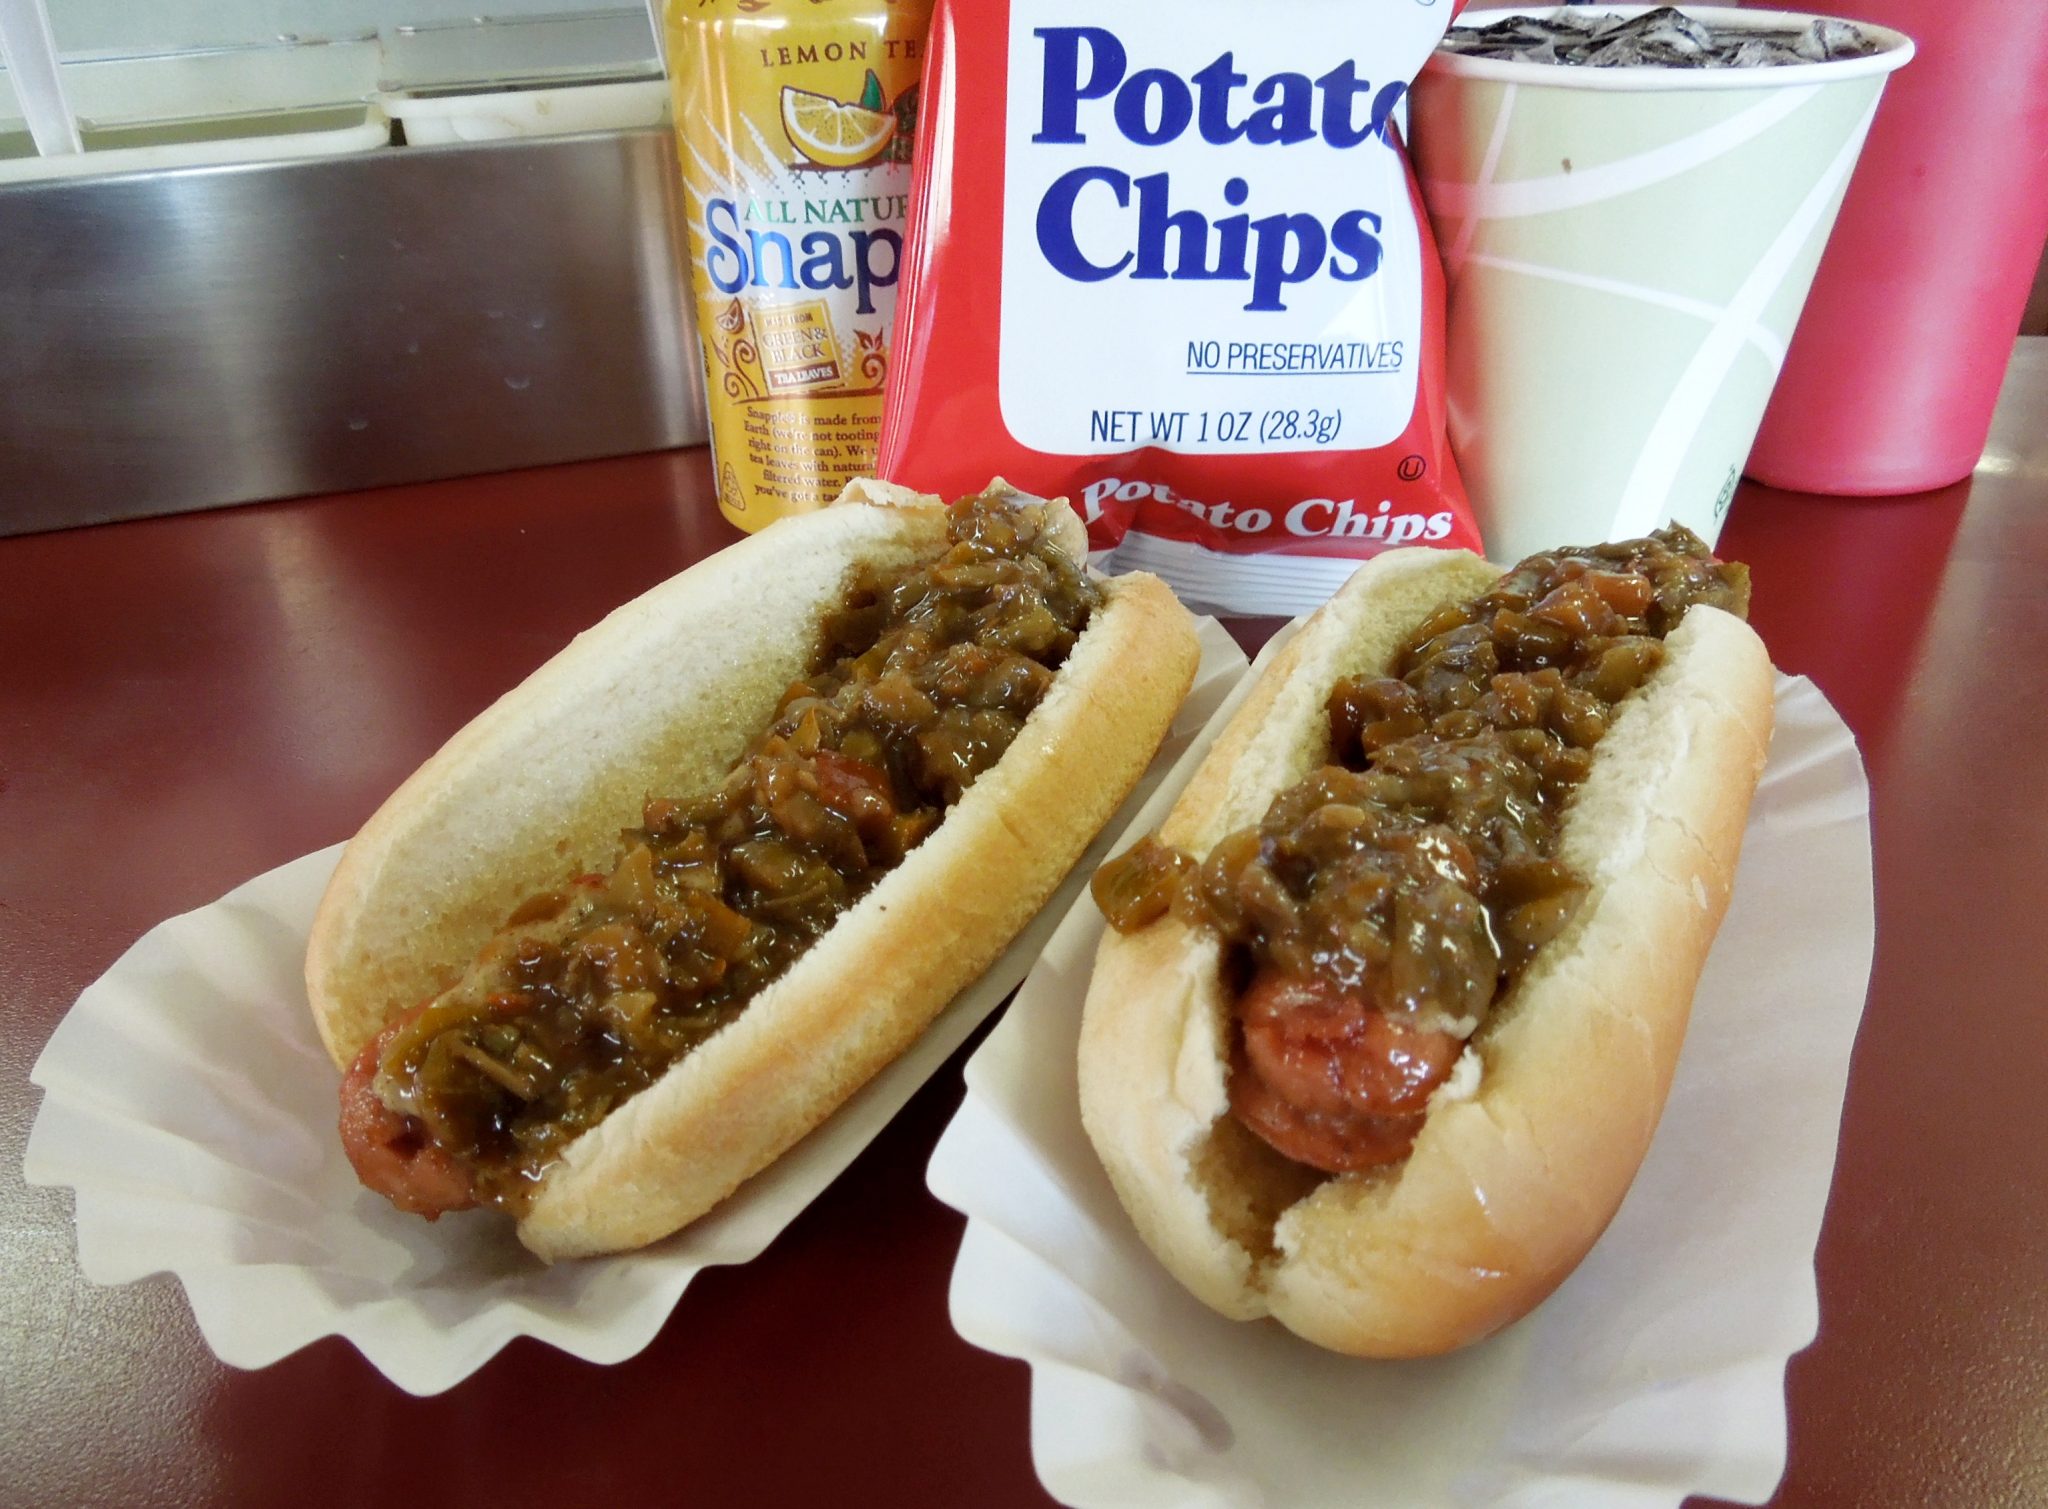 https://newengland.com/wp-content/uploads/2016/06/best-hot-dogs-in-new-england-blackies1-2048x1509.jpg